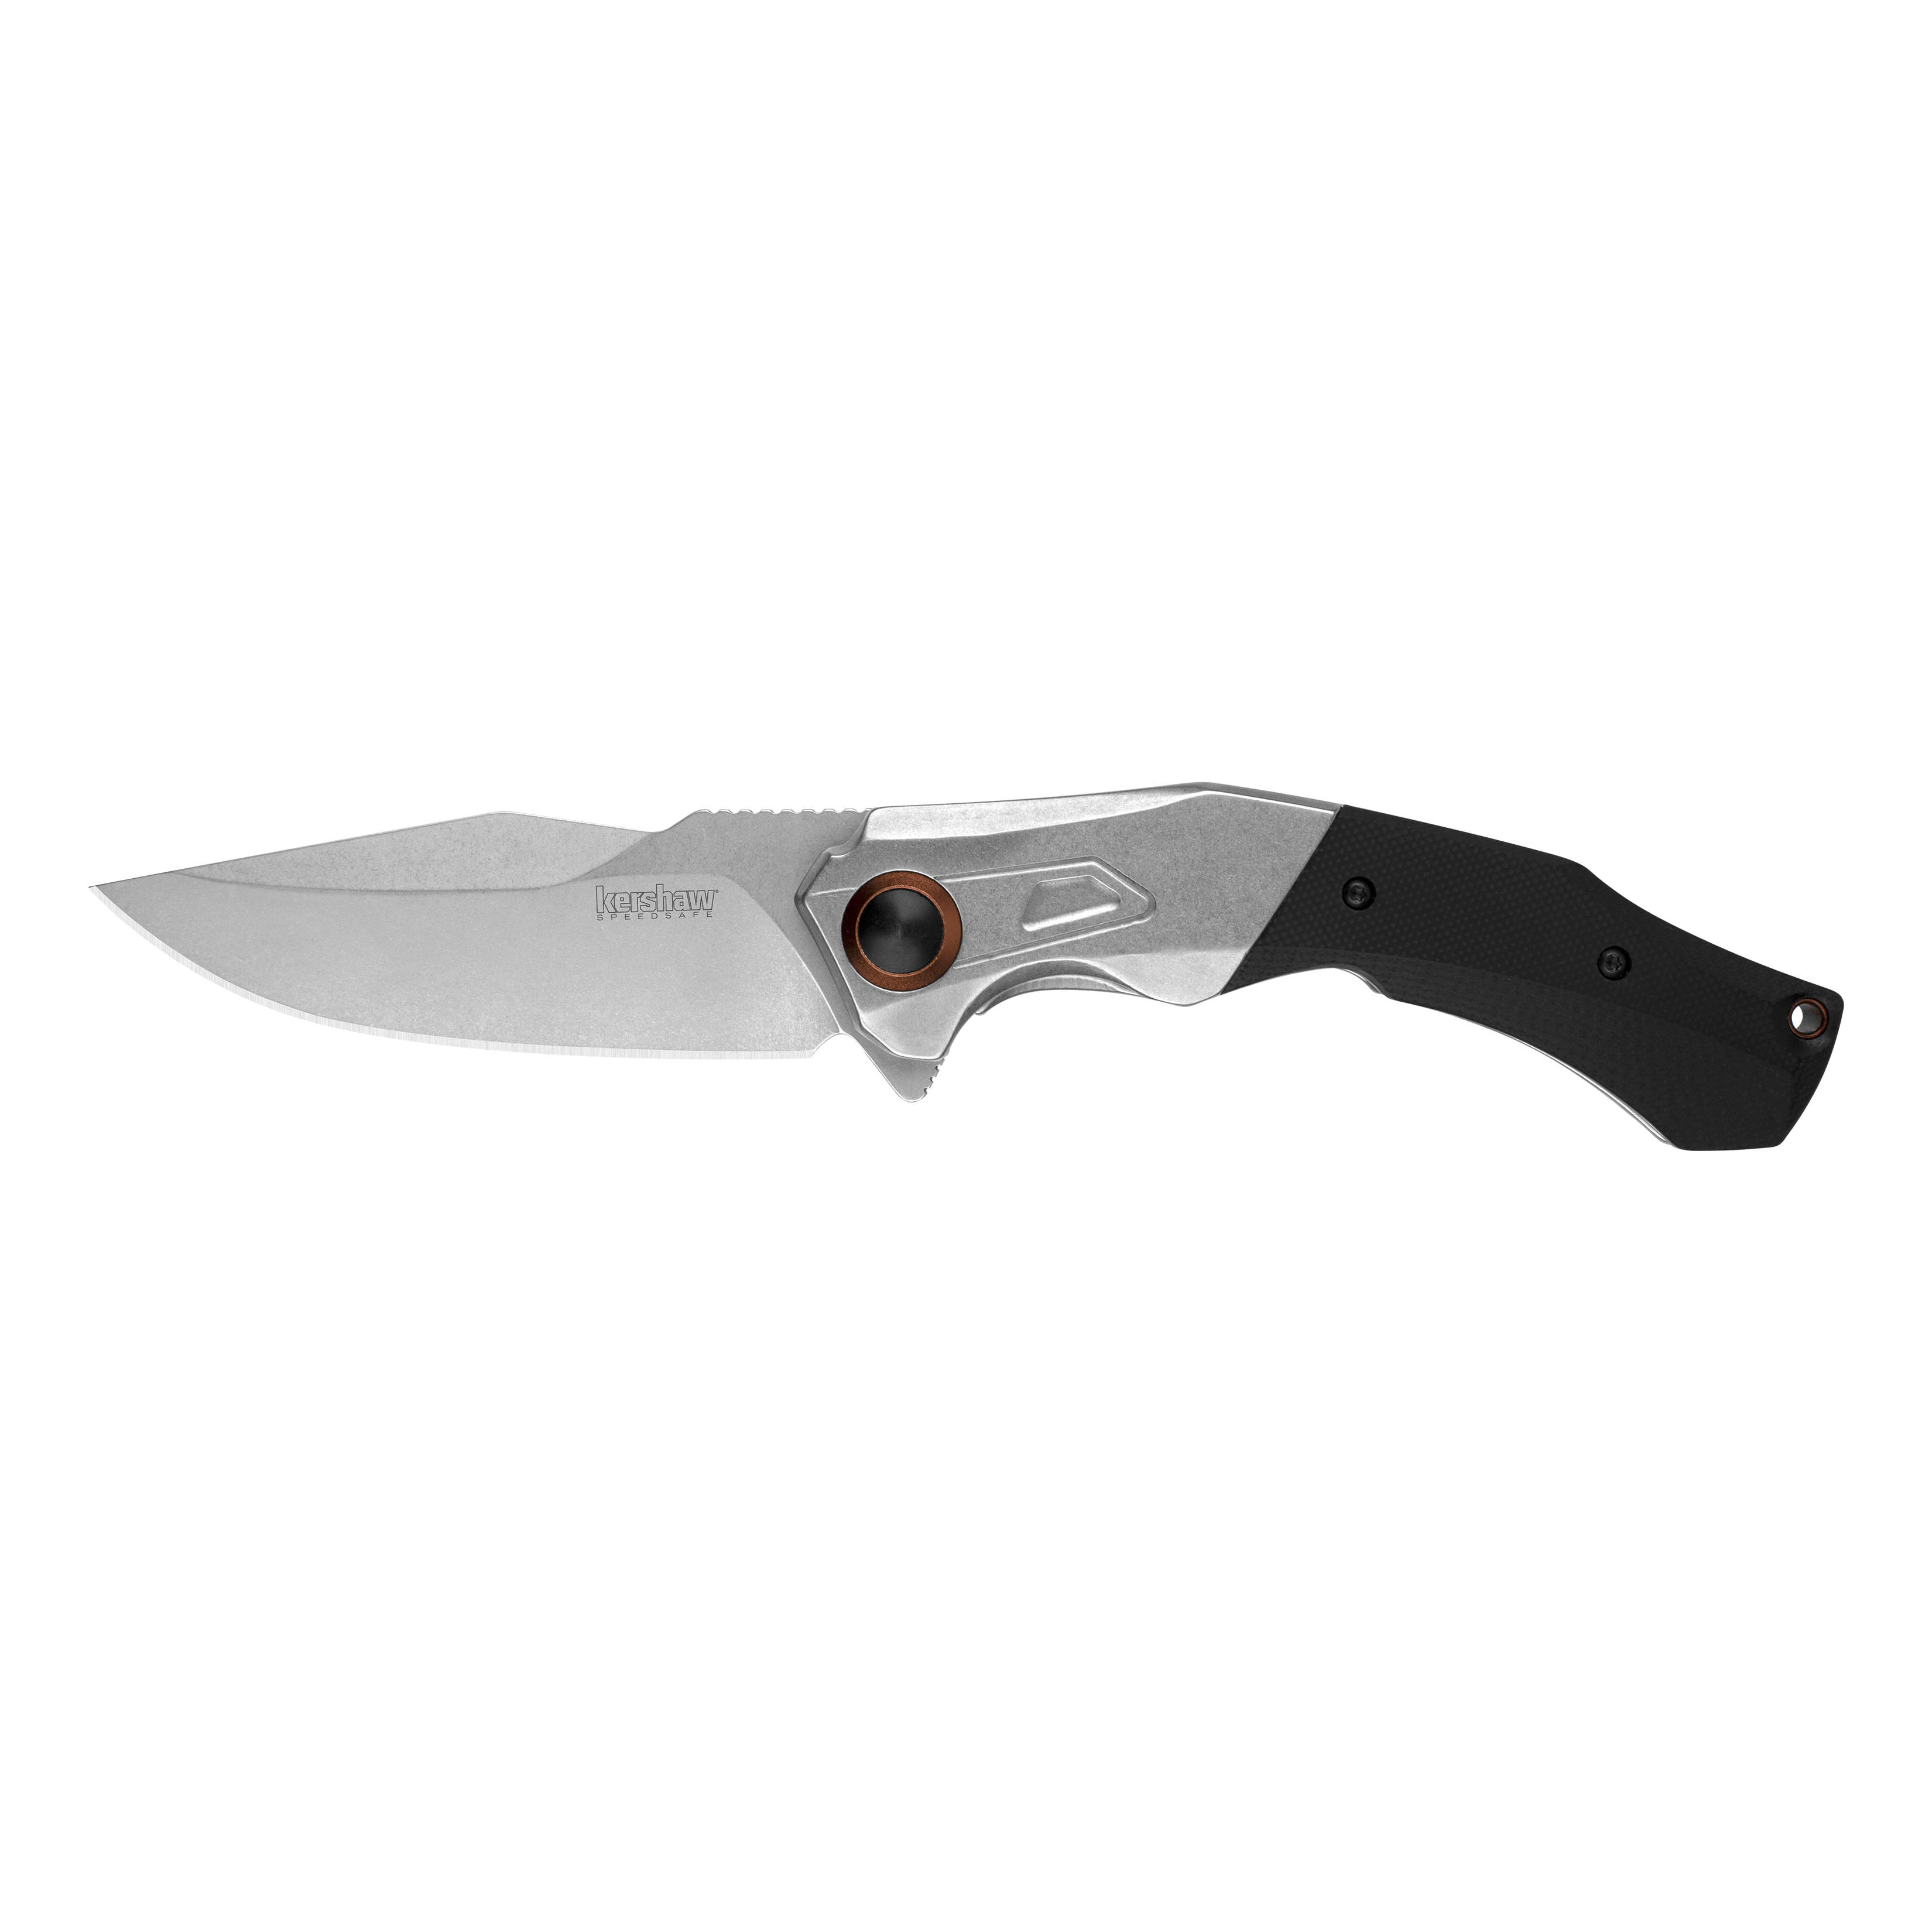 Kershaw® Payout 2075 3.5" Assisted Open Knife